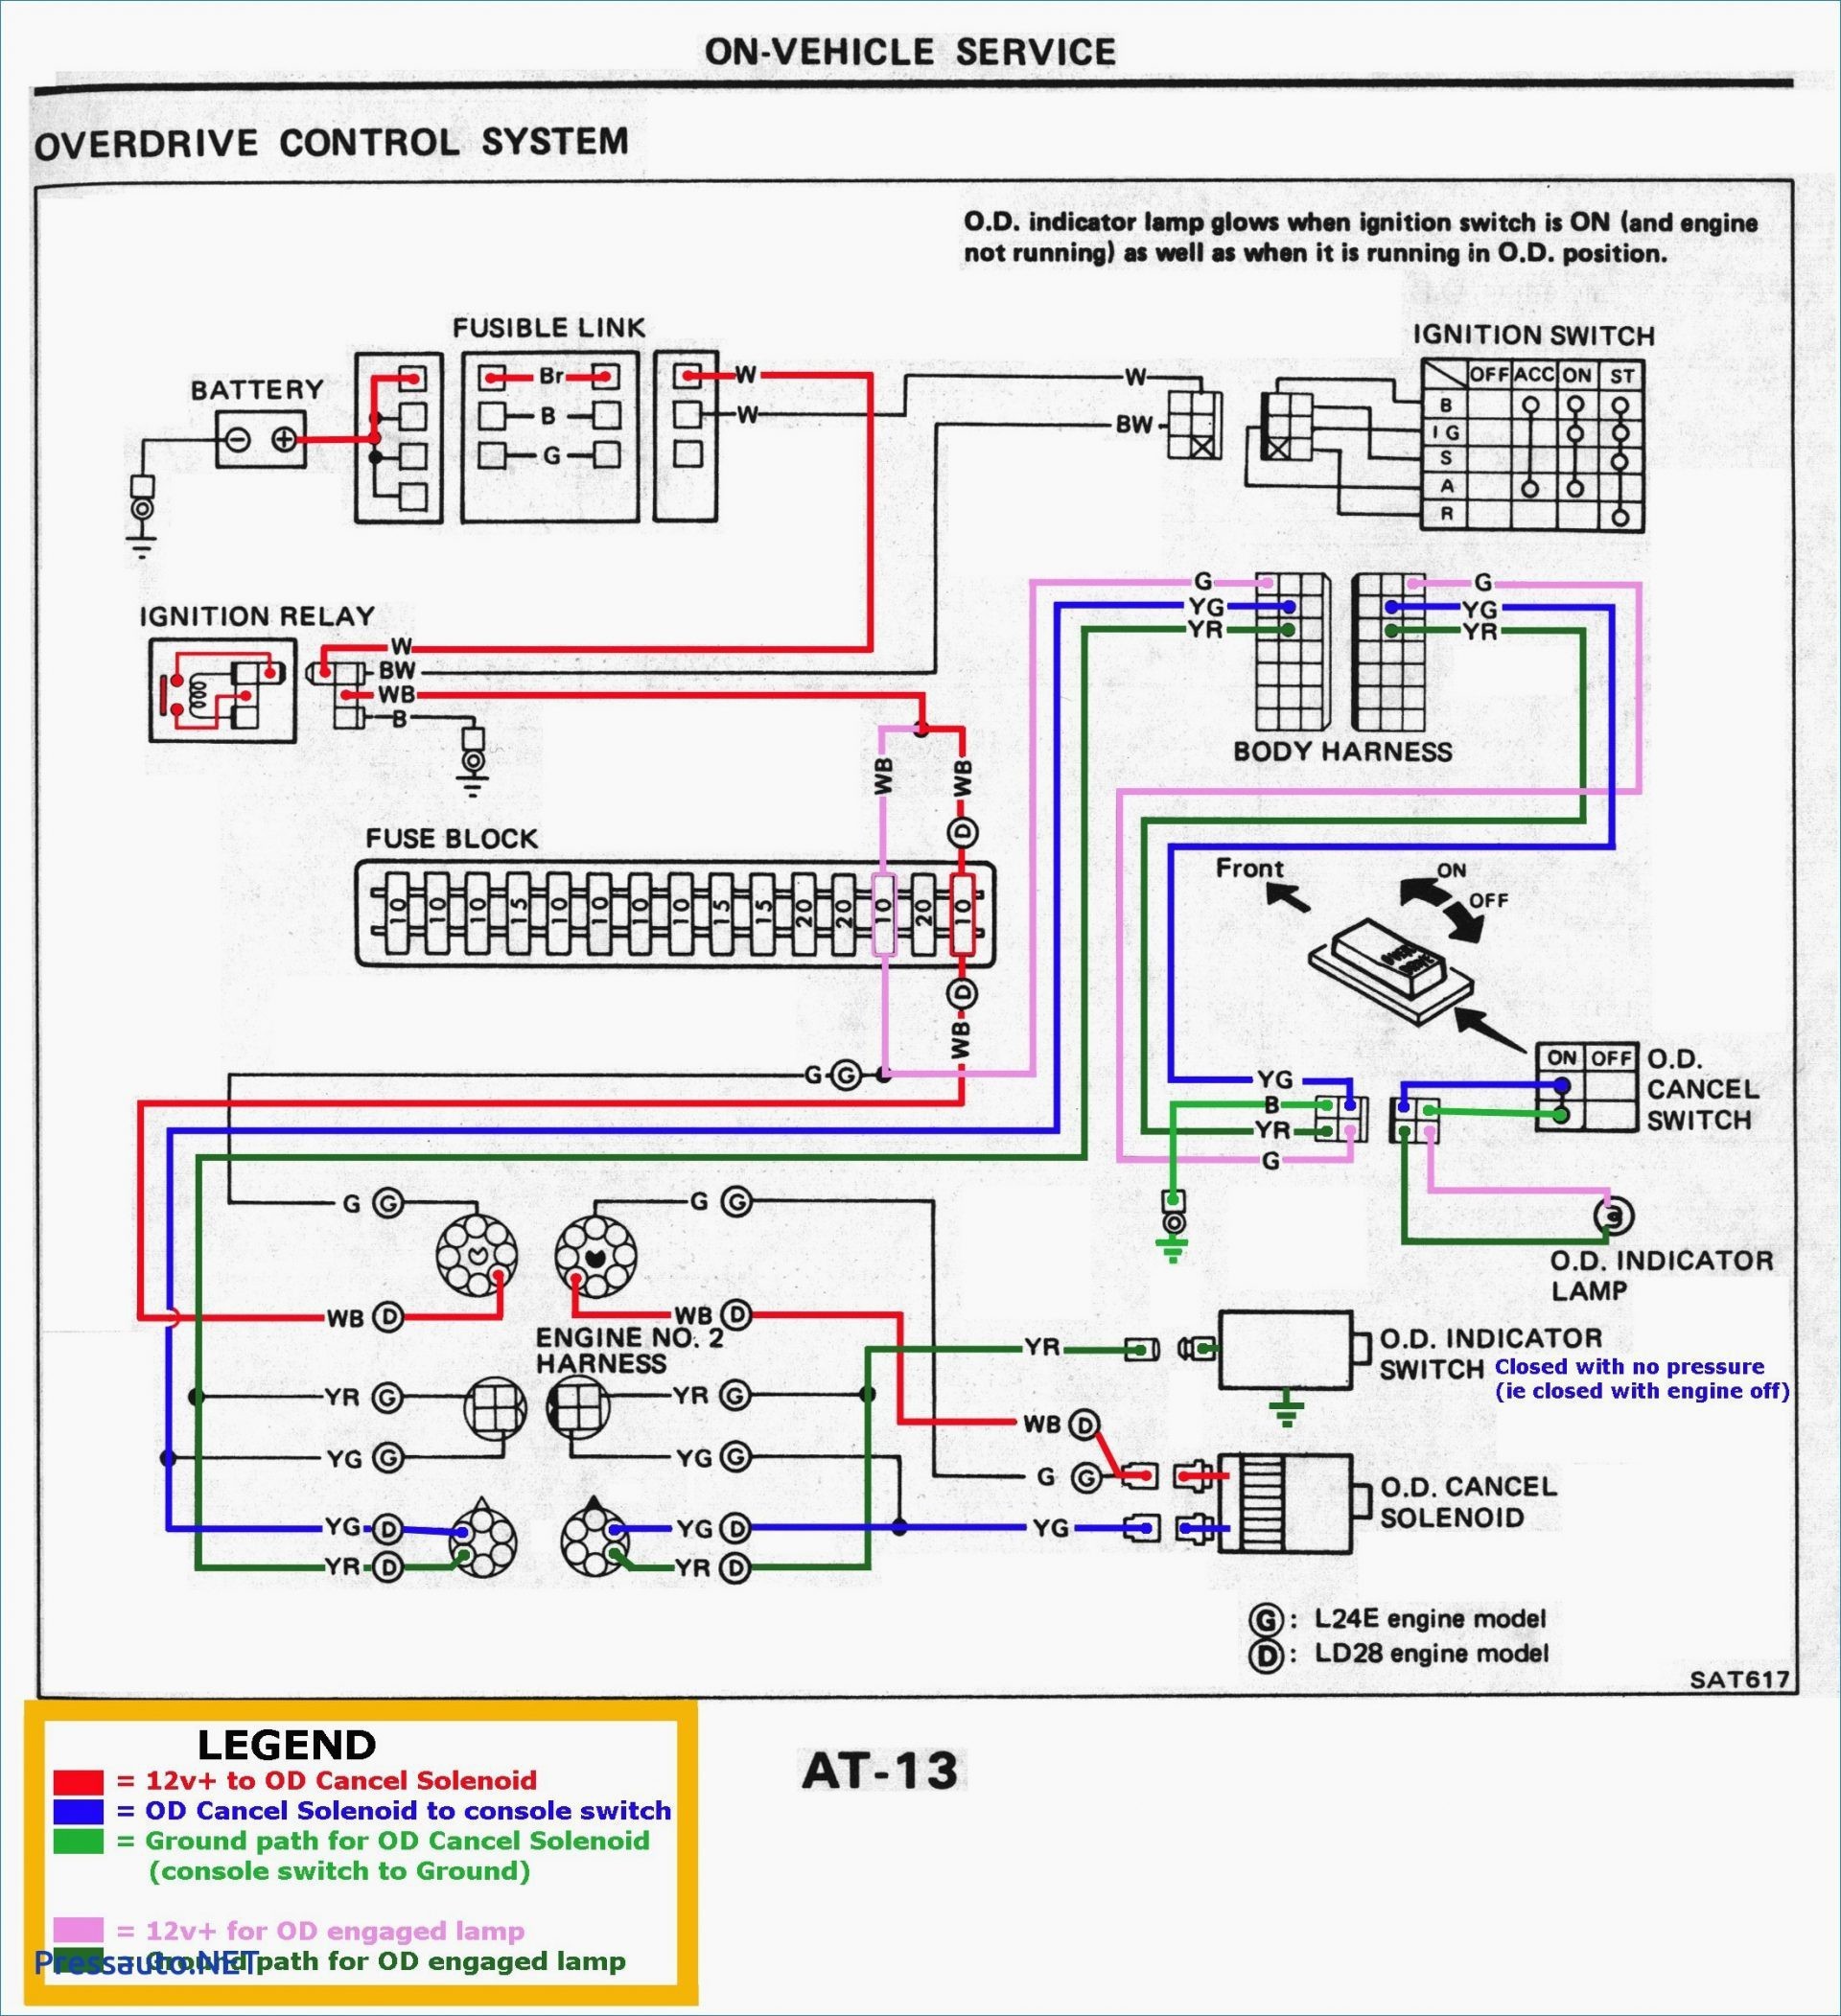 1996 ford Explorer Engine Diagram Iat Diagram 6 Wire 2014 Kia soul Worksheet and Wiring Diagram • Of 1996 ford Explorer Engine Diagram